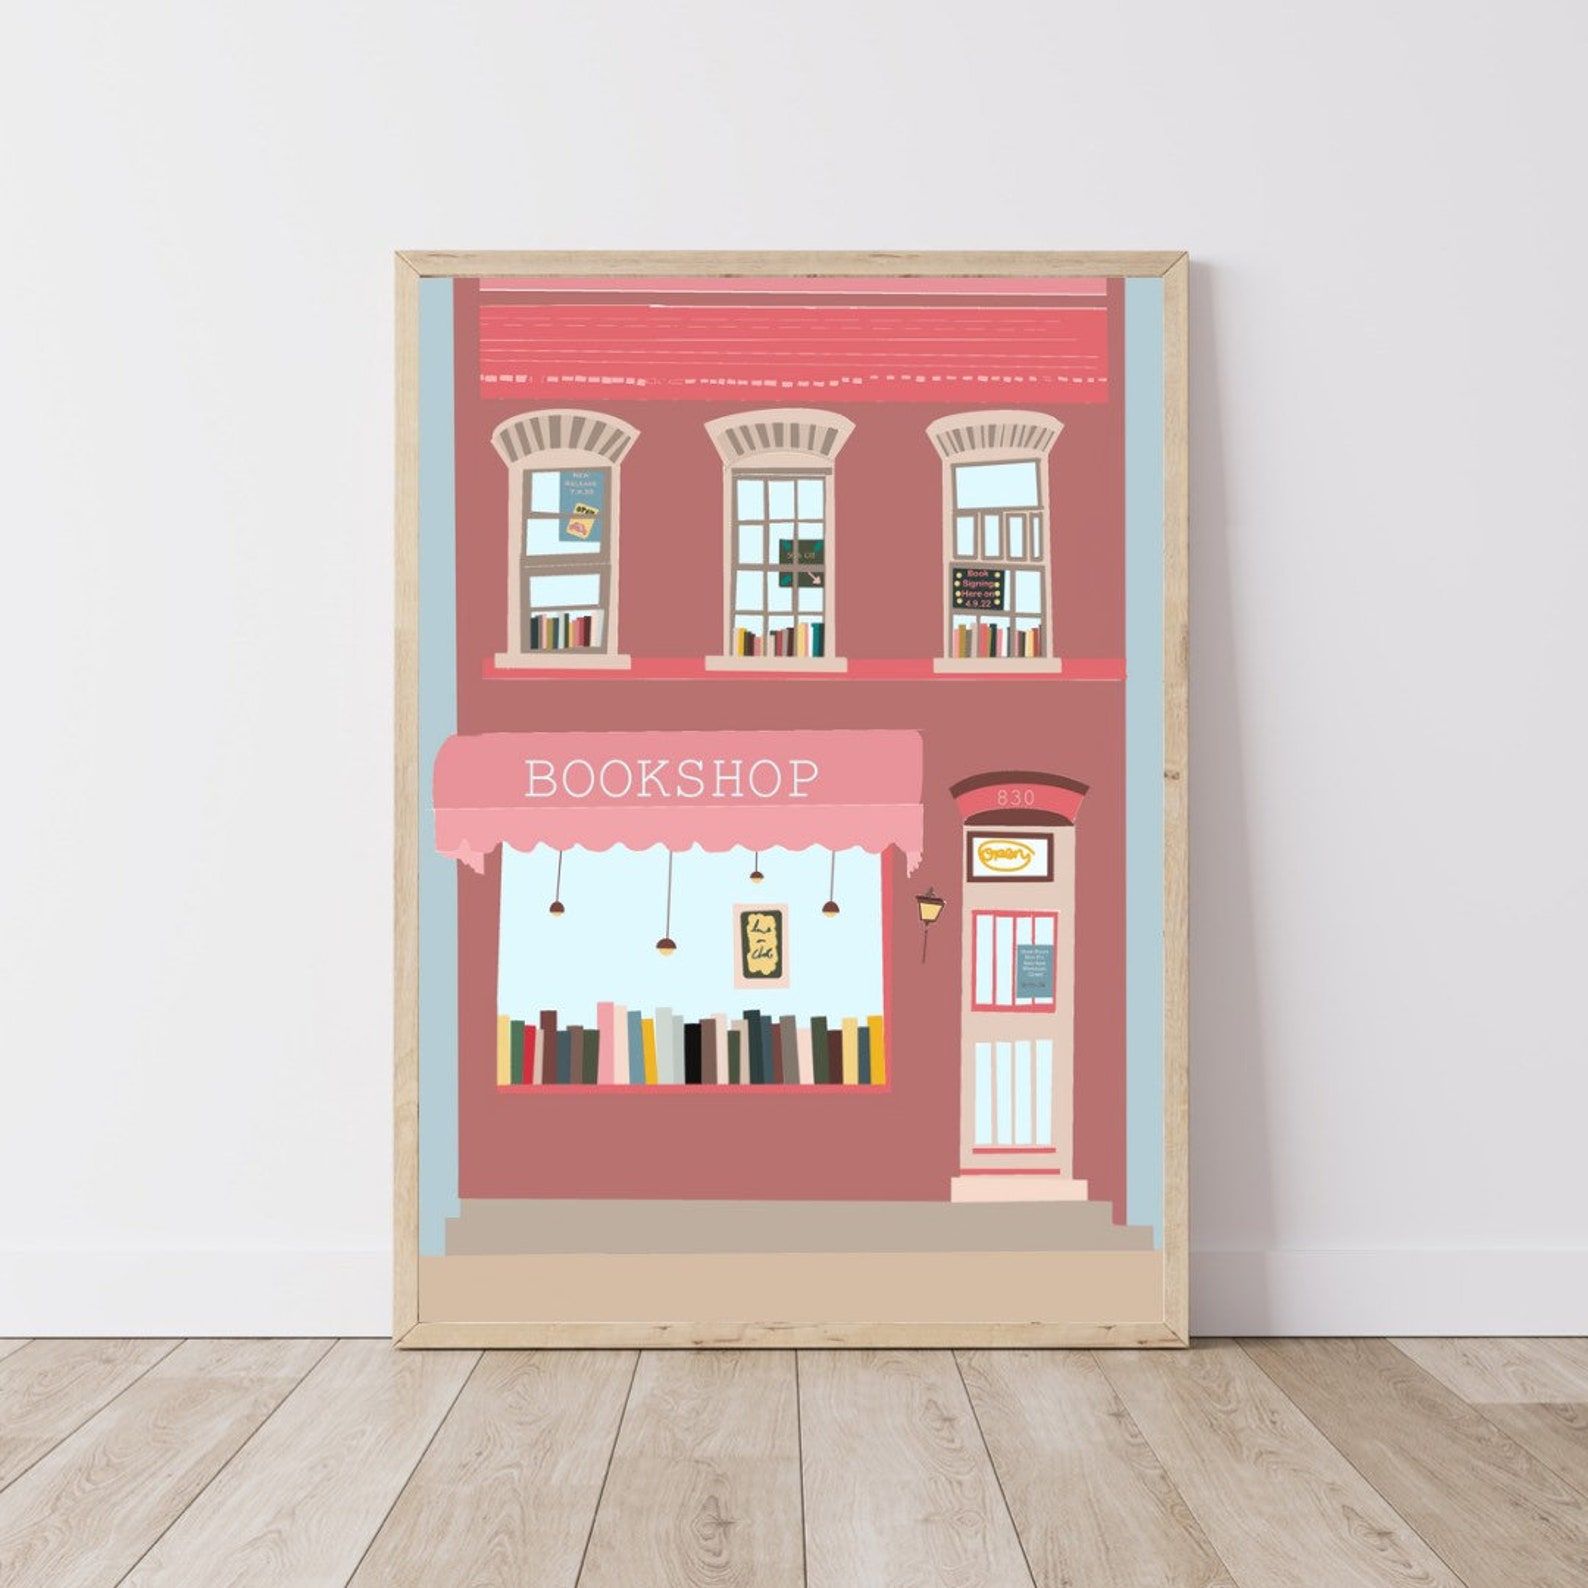 Print of a pink two story brick bookshop with glimpses of bookshelves in the windows.